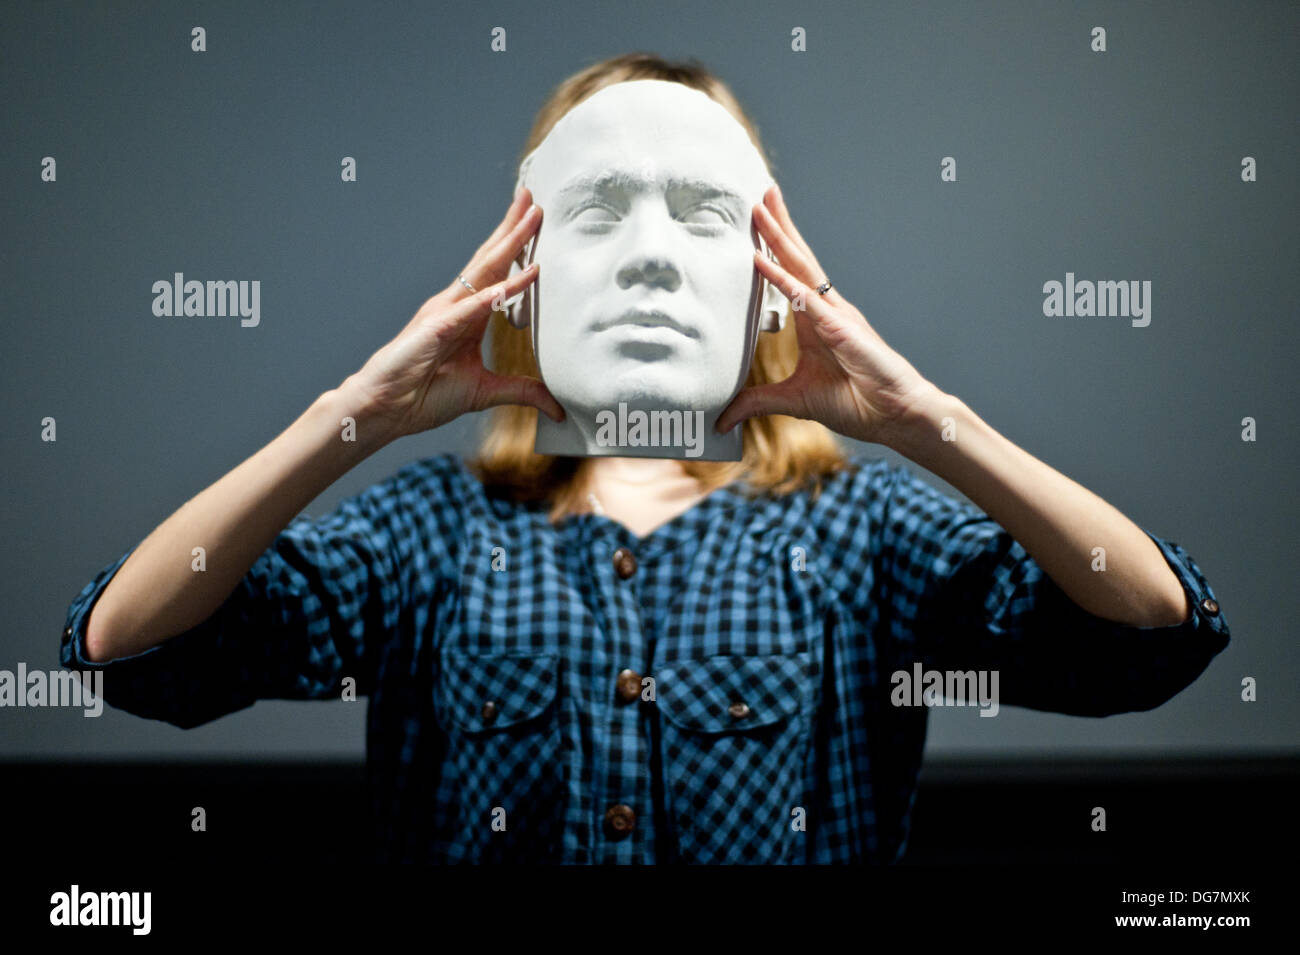 London, UK – 10 October 2013: Kathy Boyce holds a 3D printed head at the Inition, Everything in 3D demo studio in Shoreditch, East London. Stock Photo